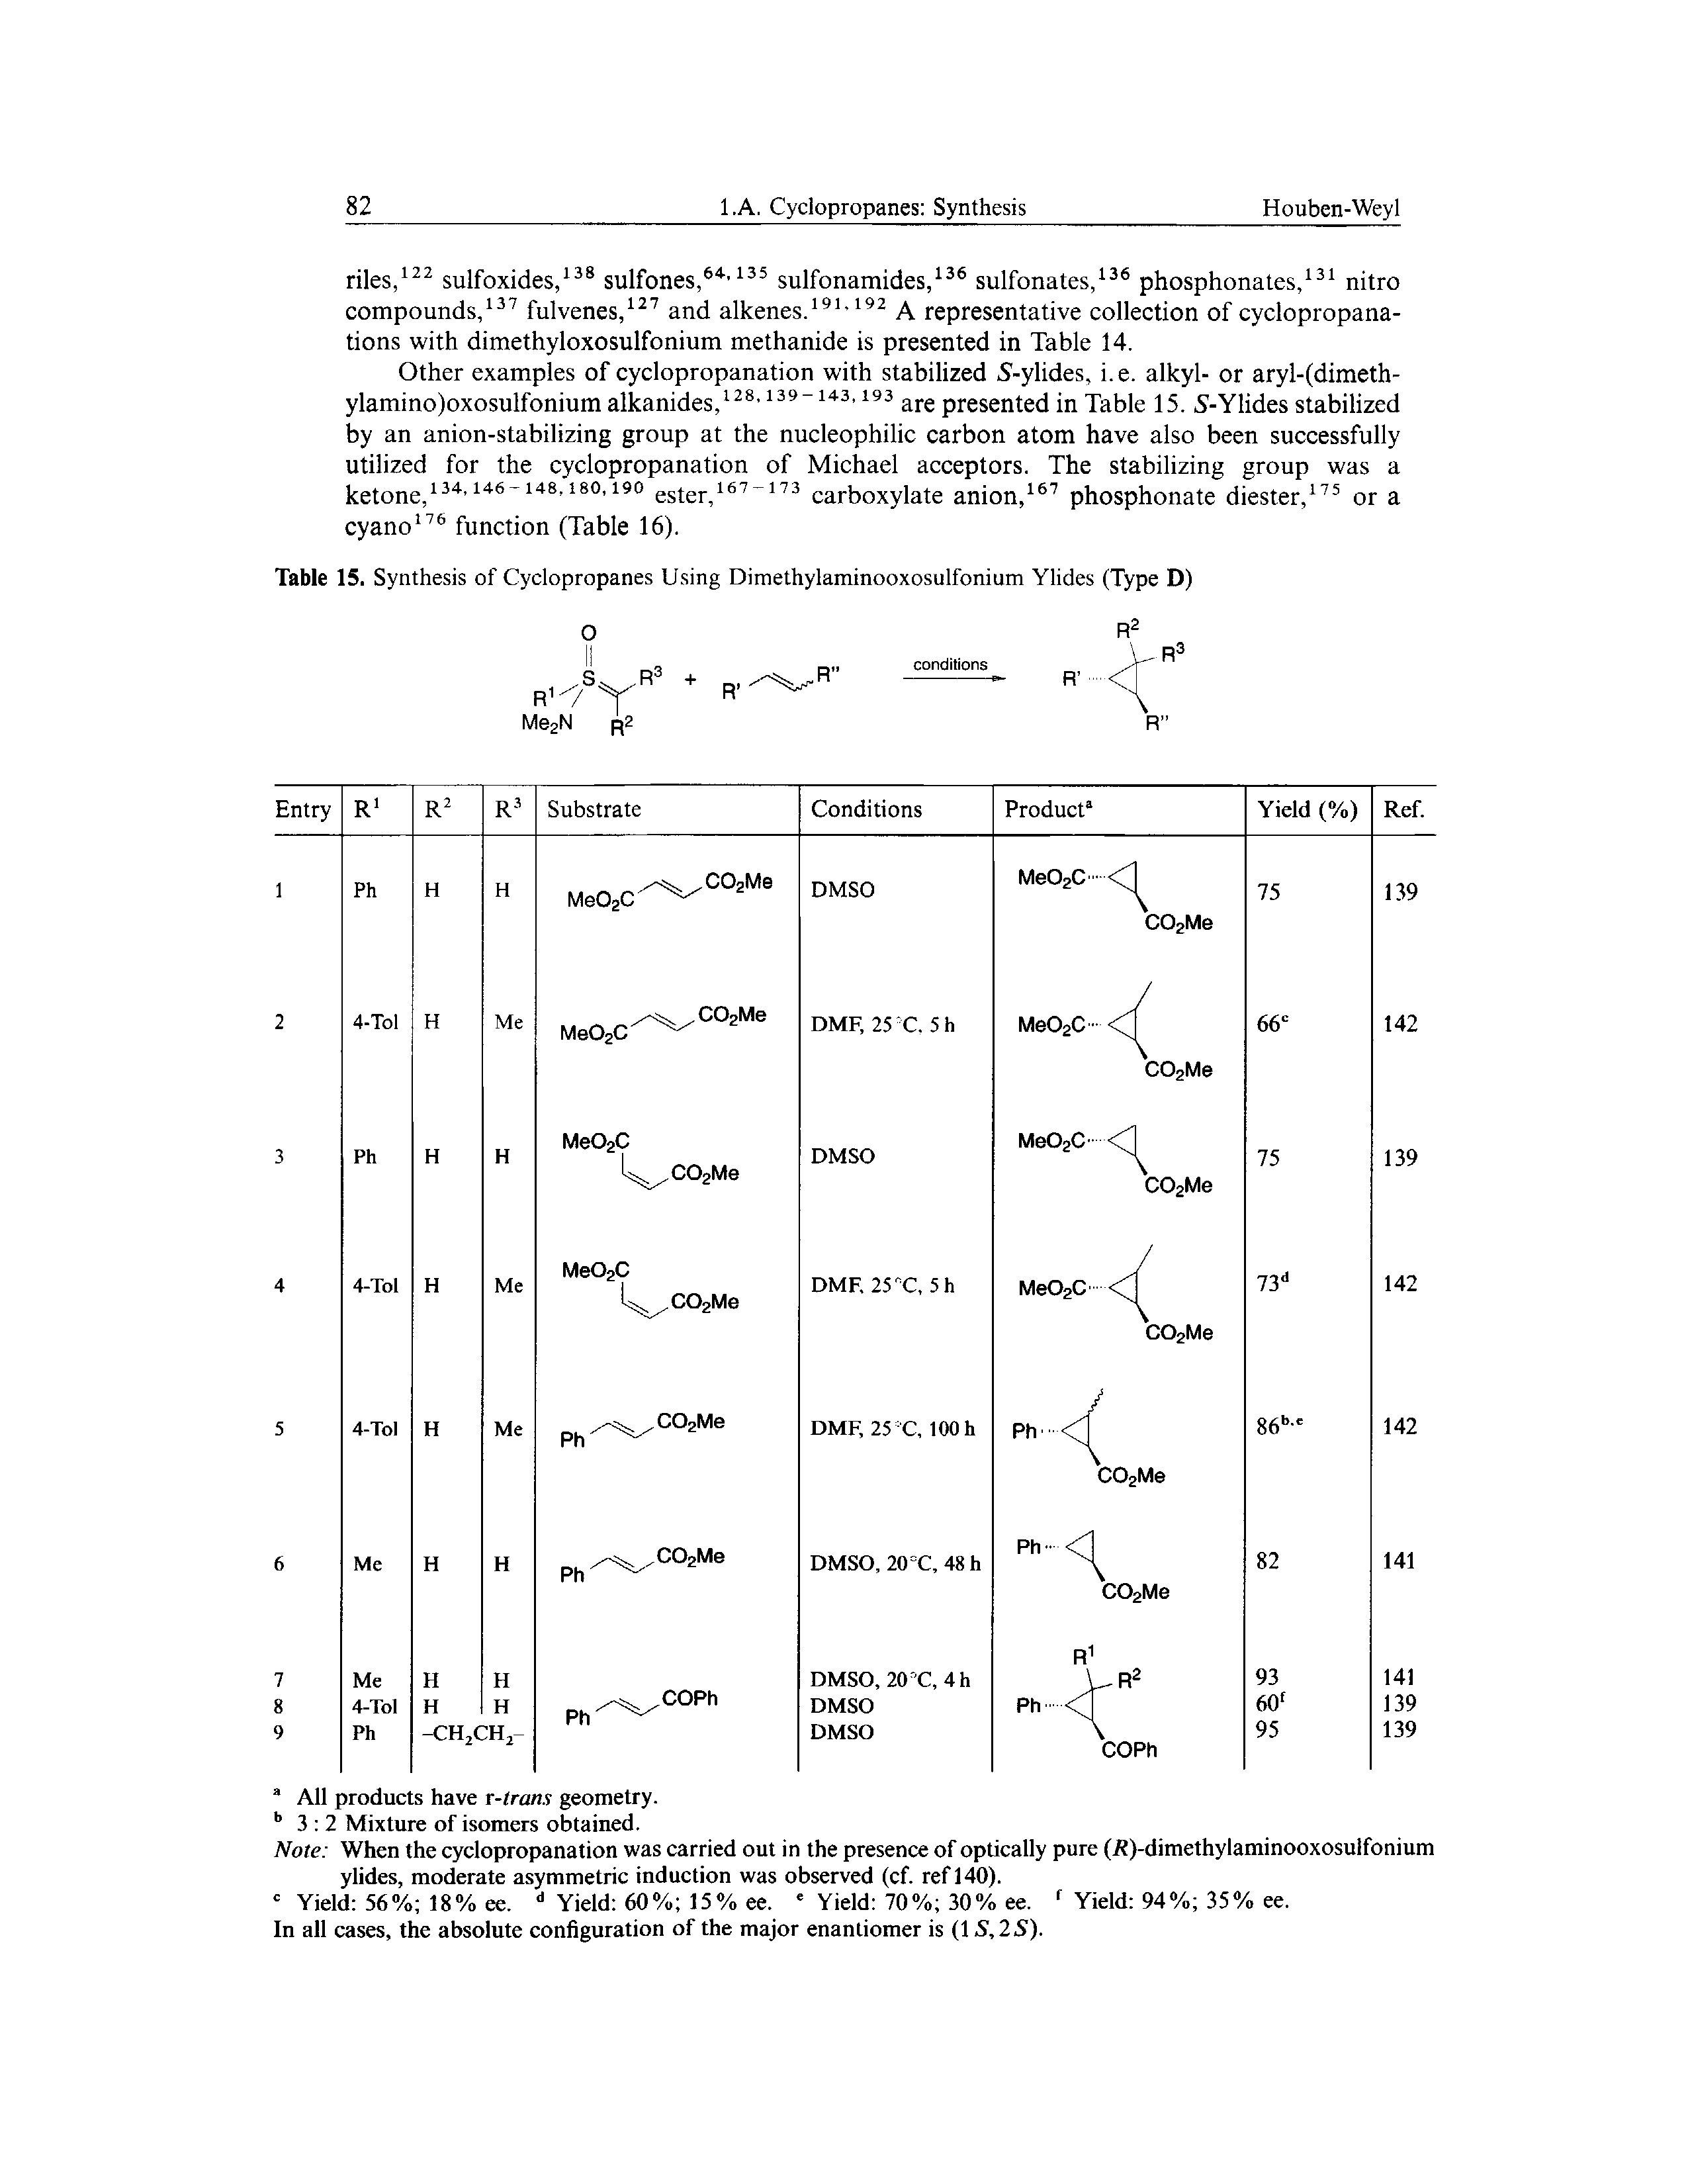 Table 15. Synthesis of Cyclopropanes Using Dimethylaminooxosulfonium Ylides (Type D)...